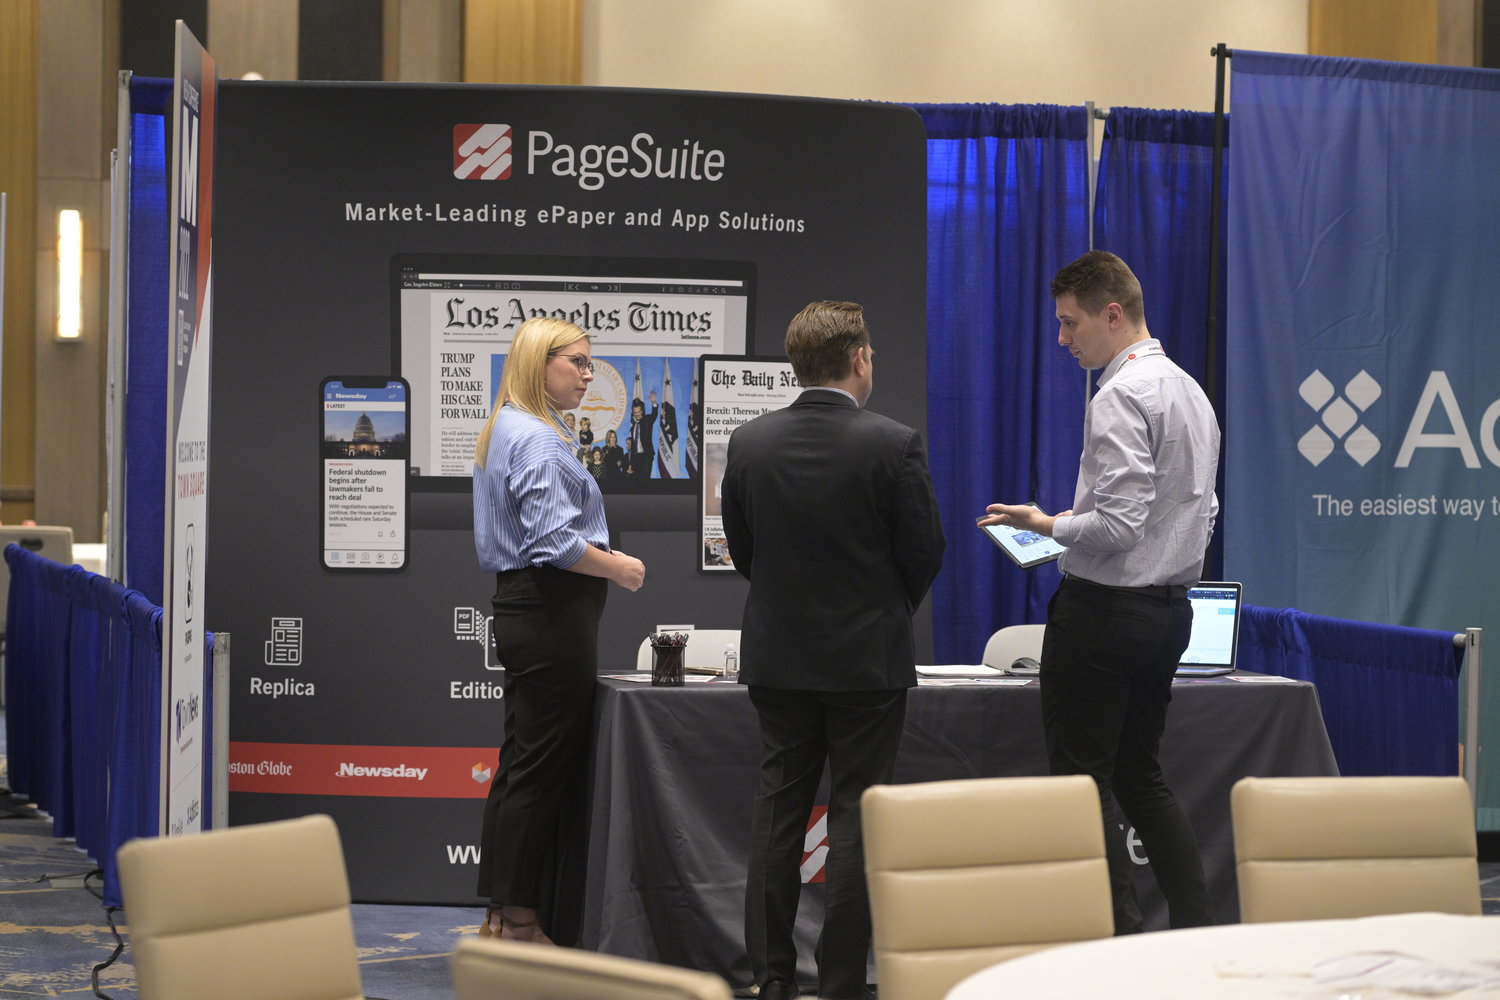 PageSuite was an exhibitor in the Town Square. (Photo by Phelan M. Ebenhack)